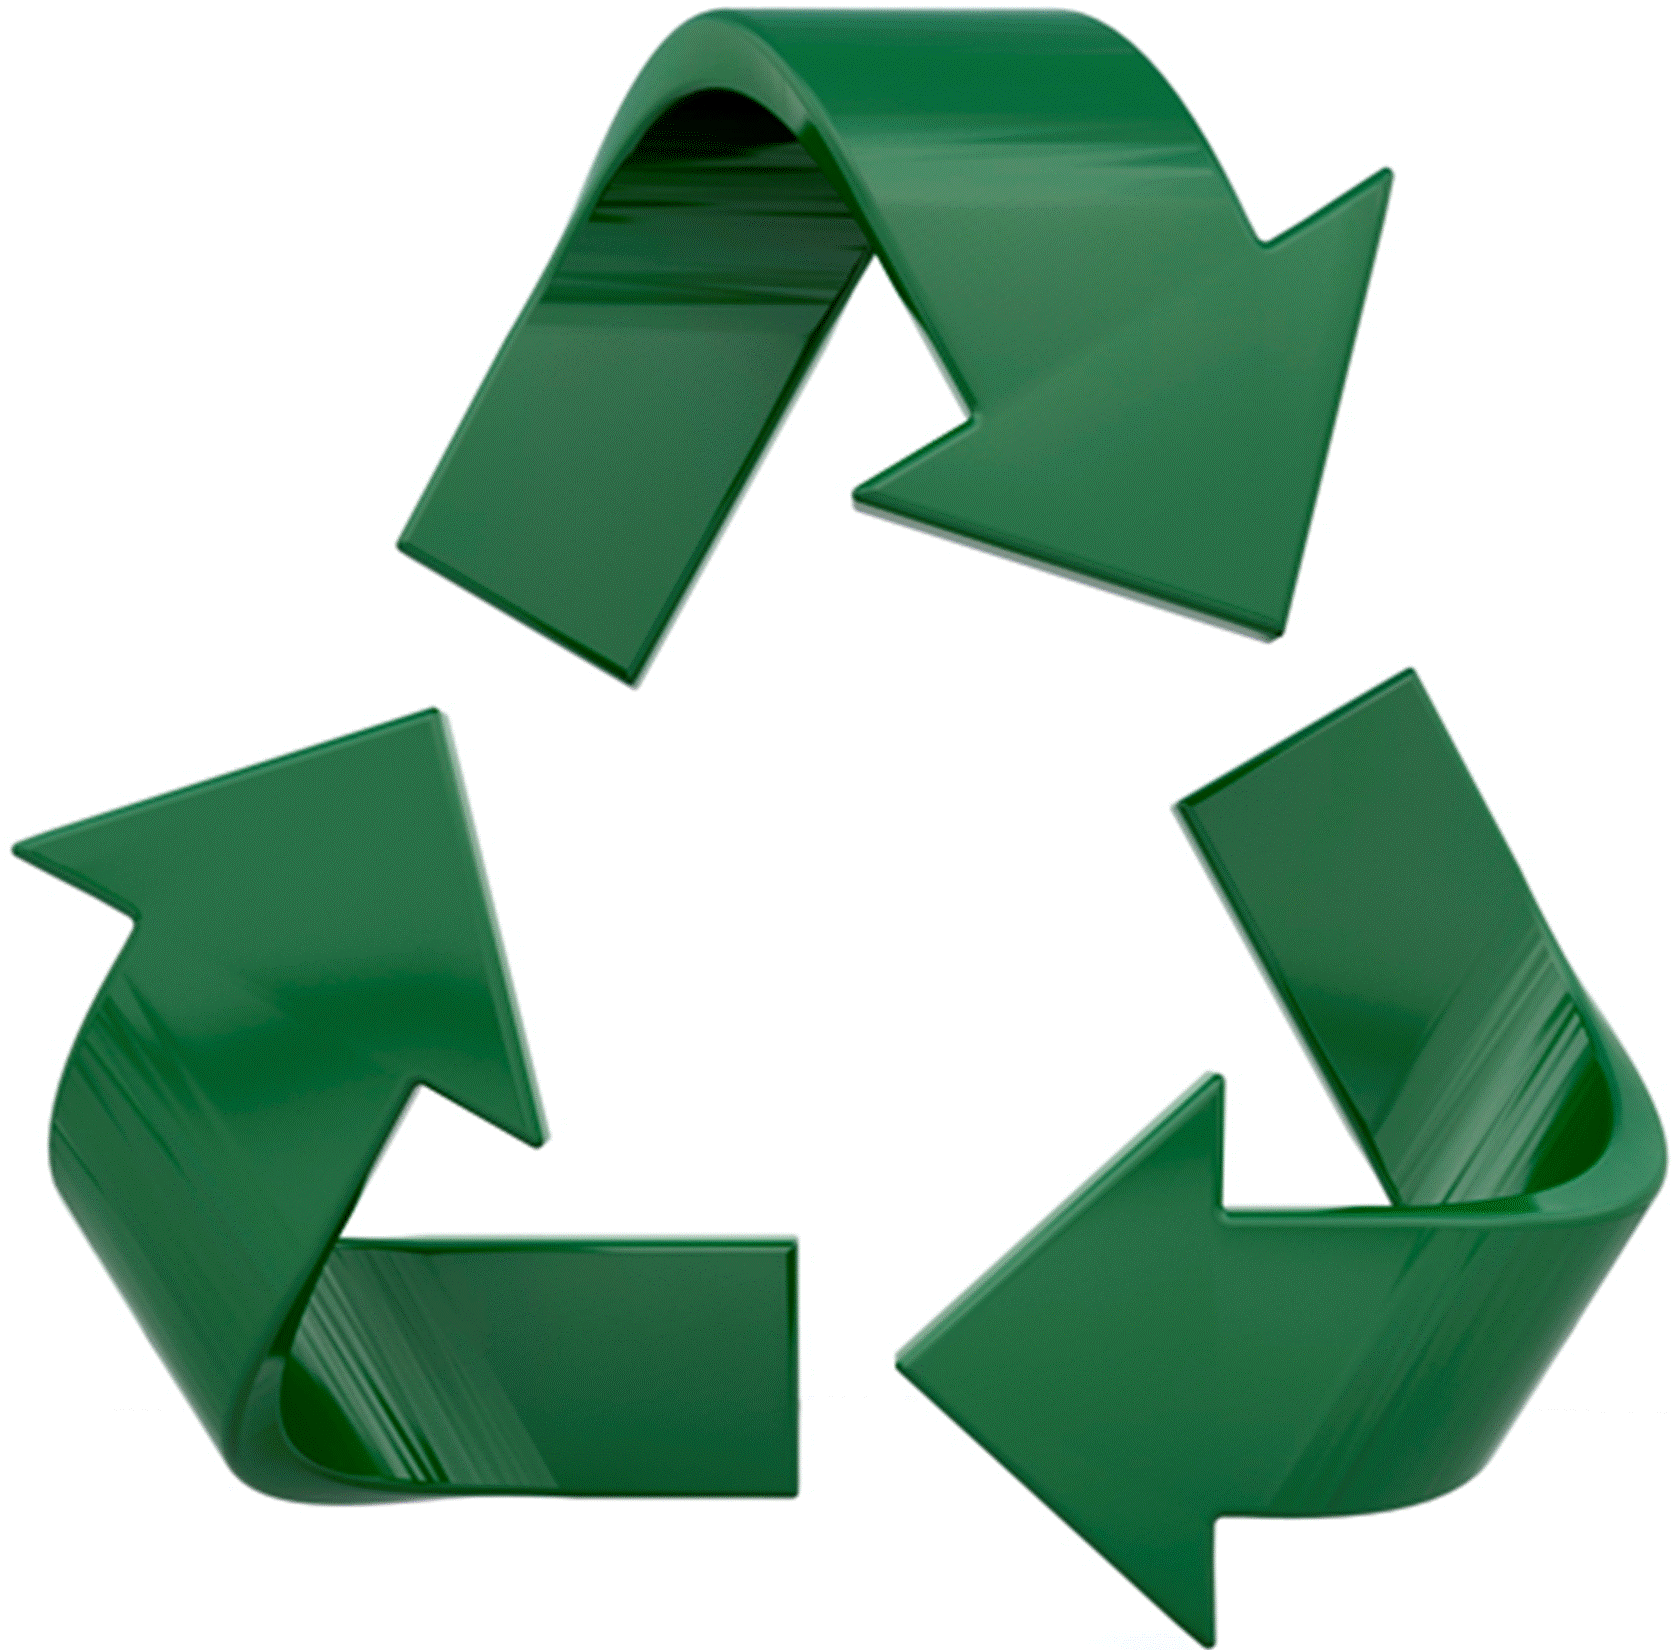 Free Recycle Logo Image, Download Free Recycle Logo Image png images